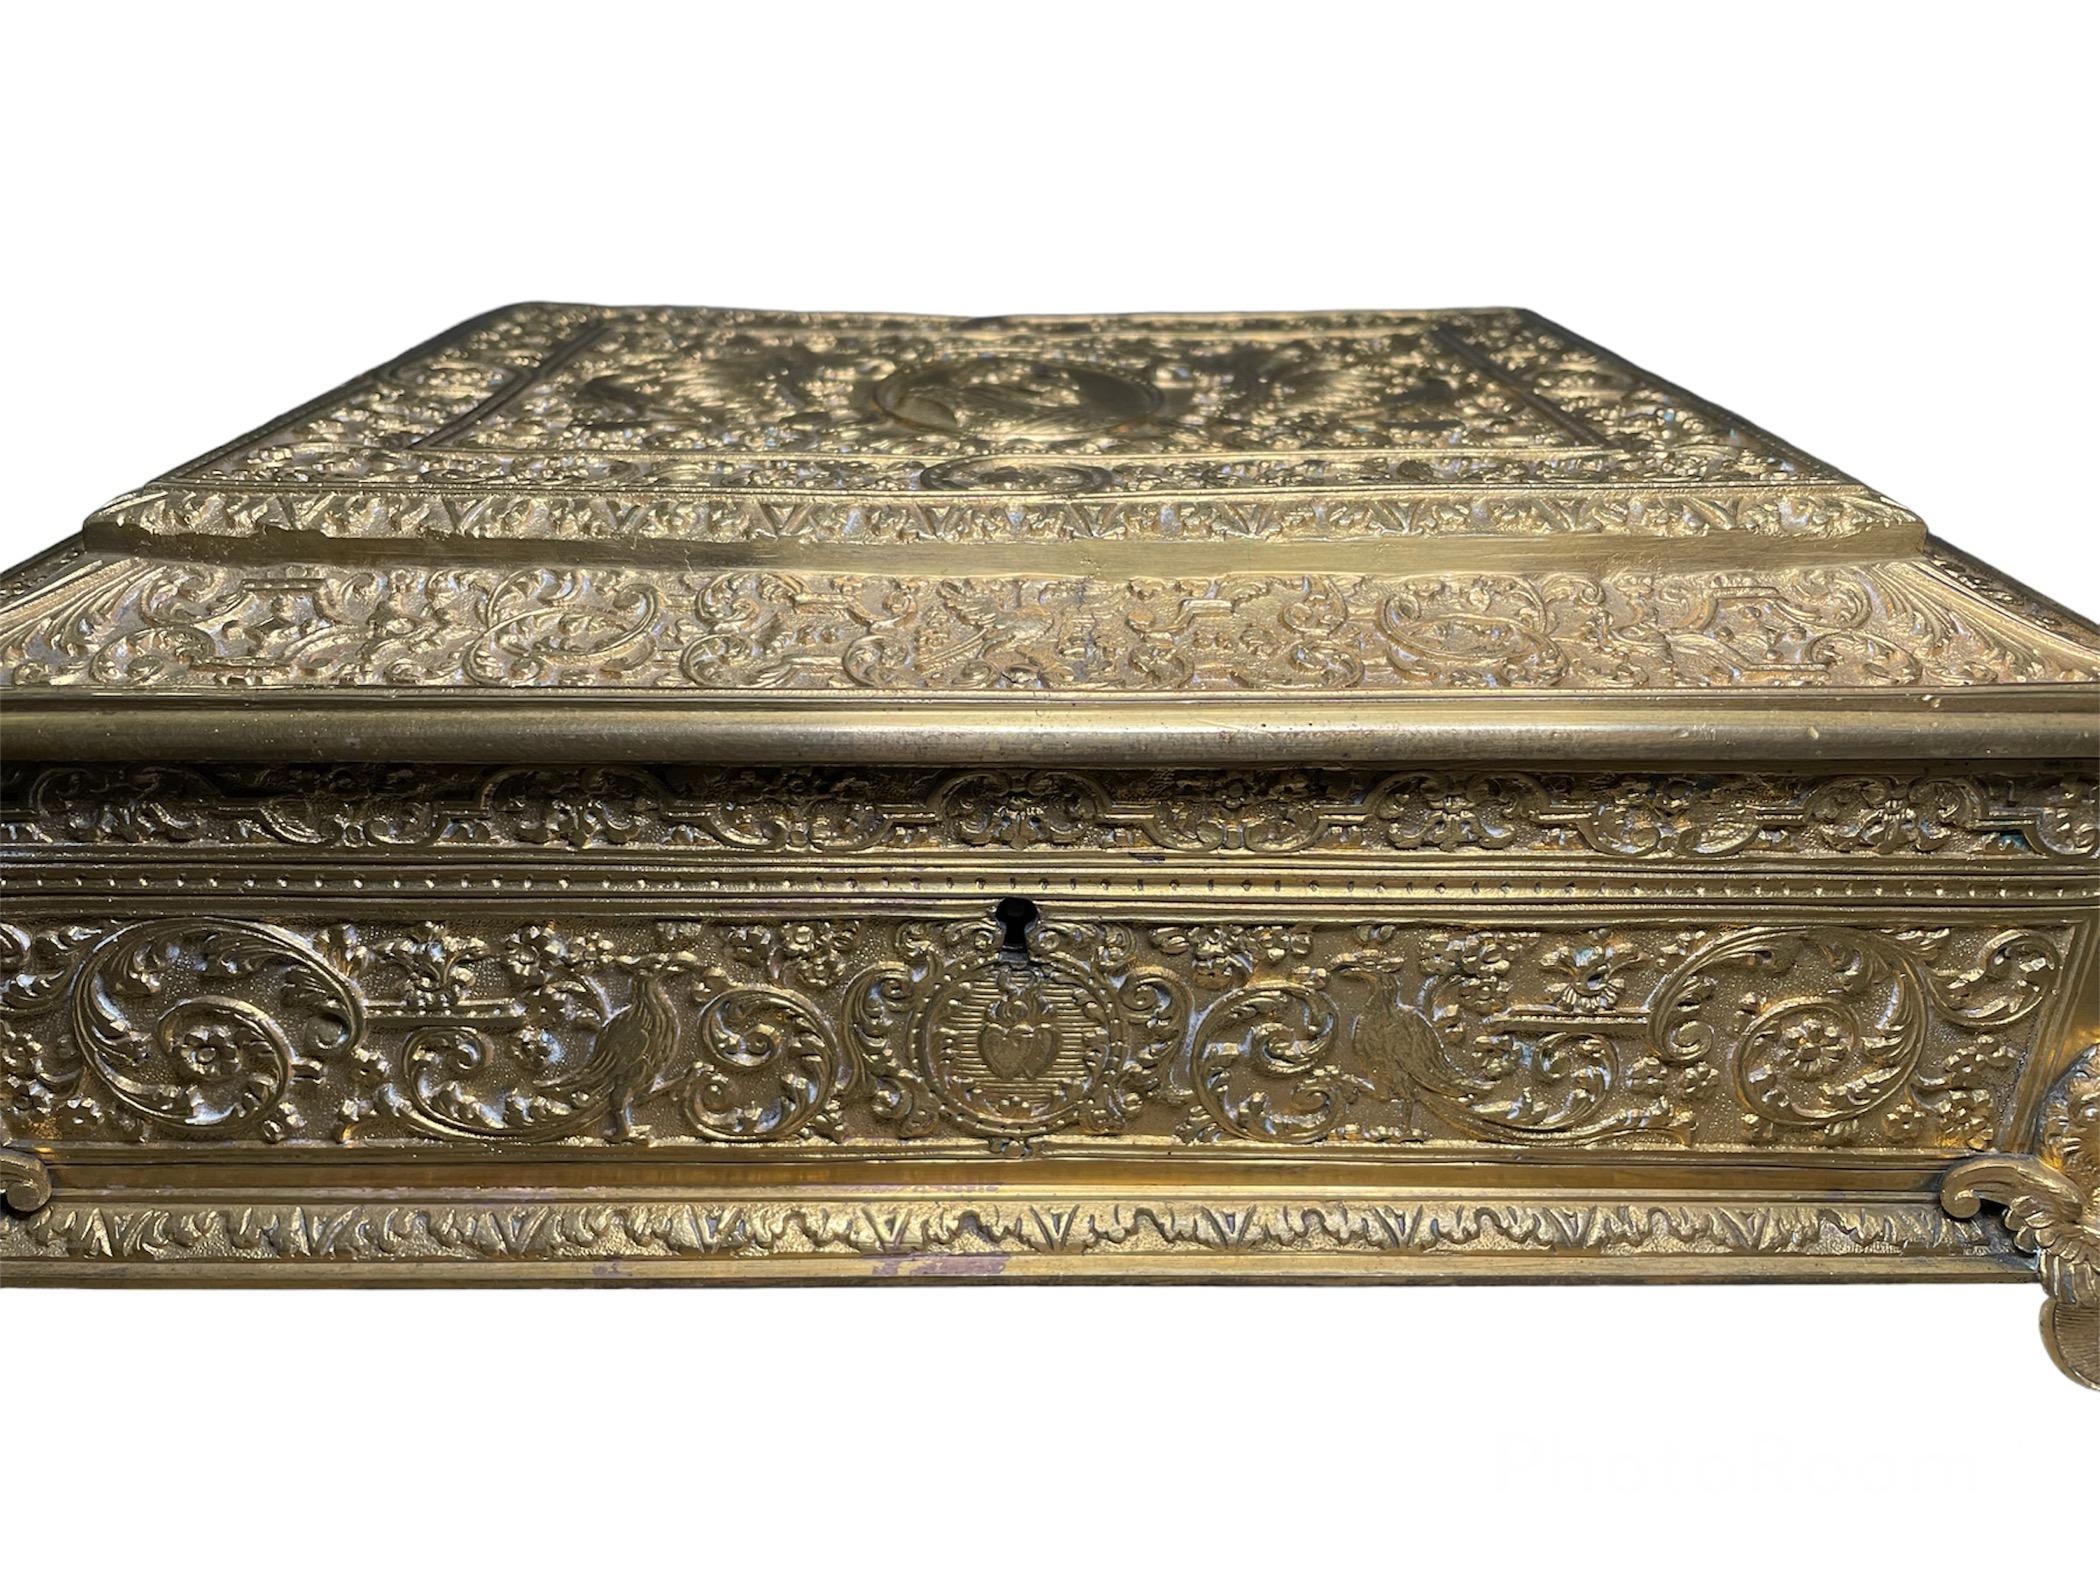 This is a Renaissance style gilt bronze rectangular casket lidded box. It depicts embossed decoration of scrolls of acanthus leaves, birds flowers and hearts around the whole box. In the center of the lid, there is a “cameo” or relief of the profile